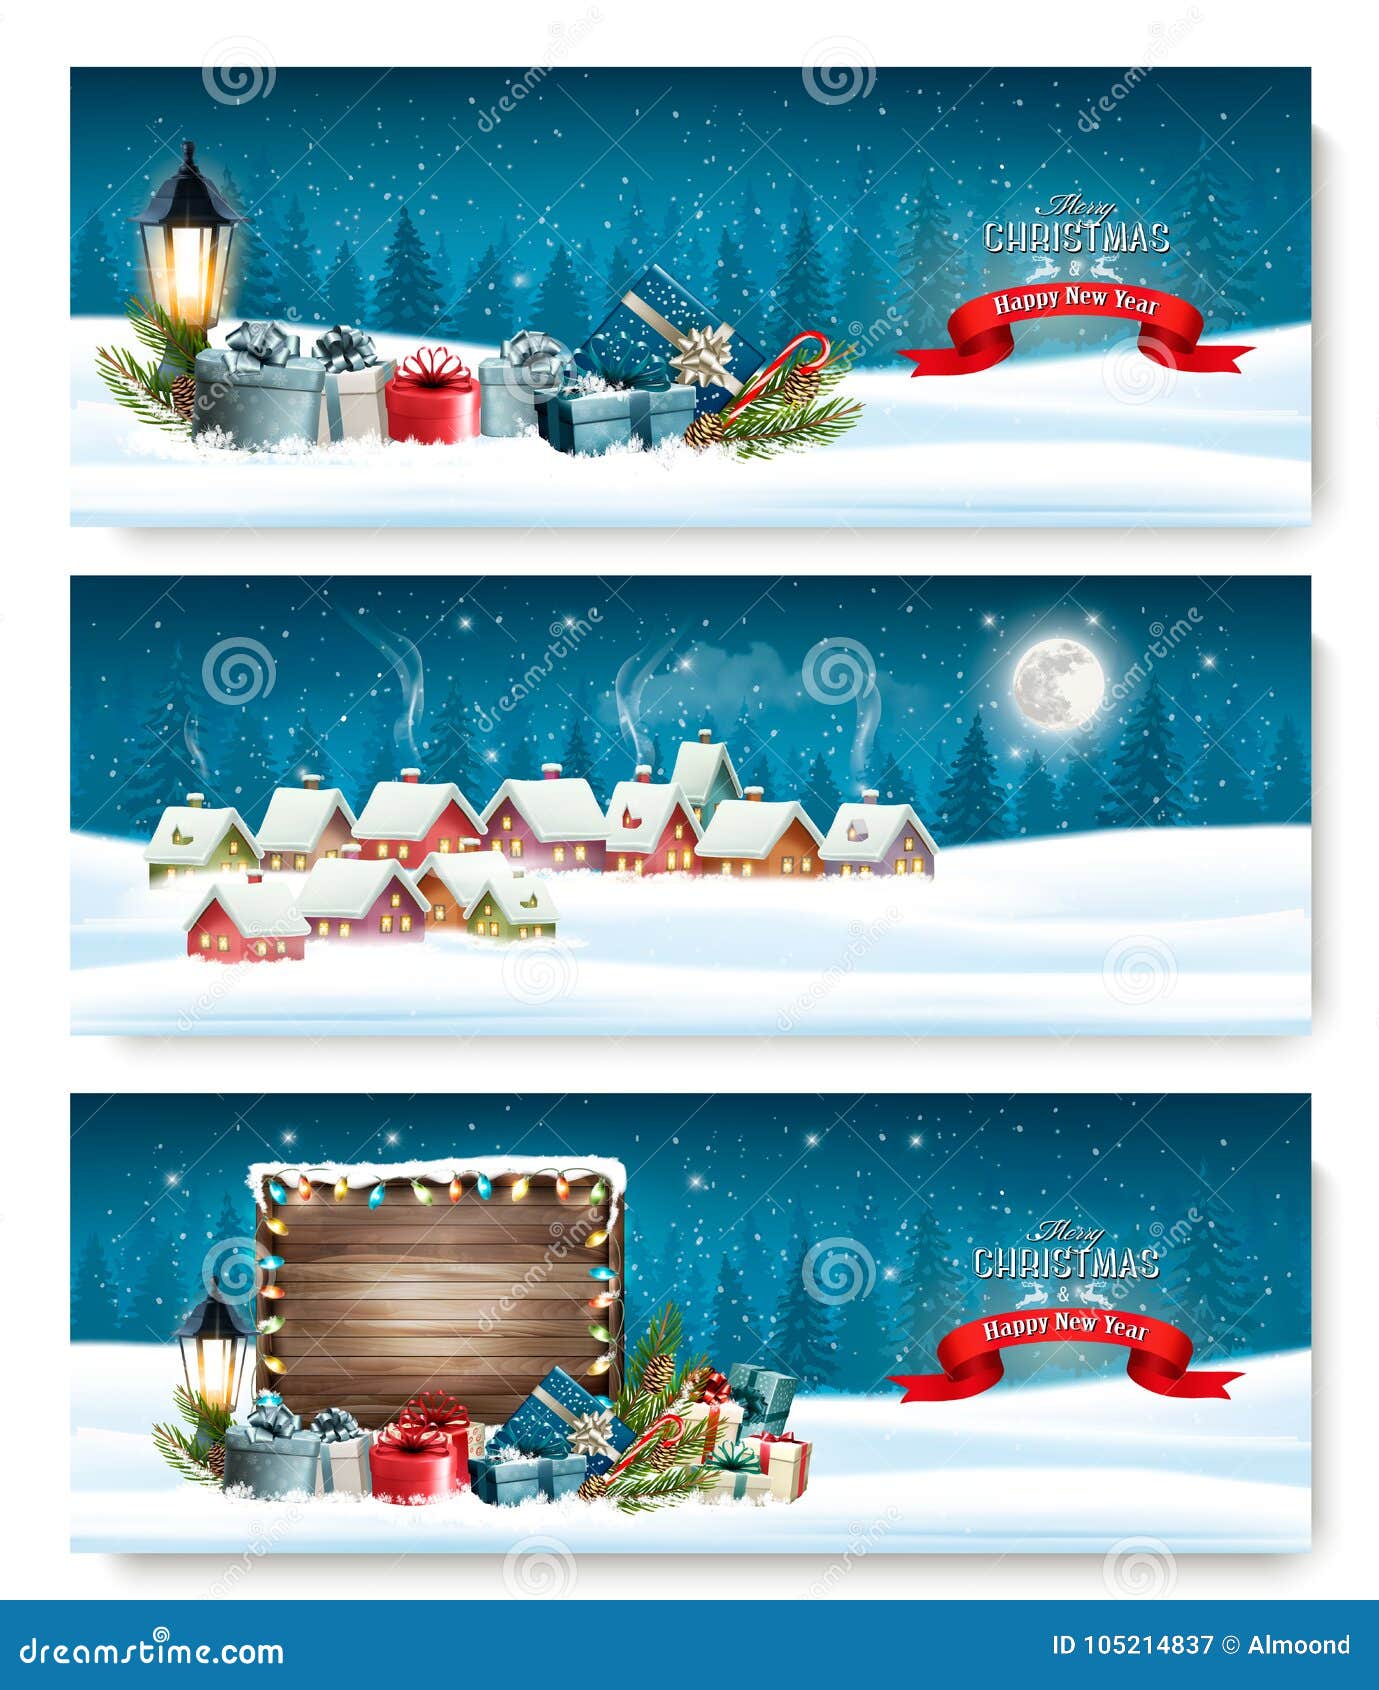 three holiday christmas banners with a winter village